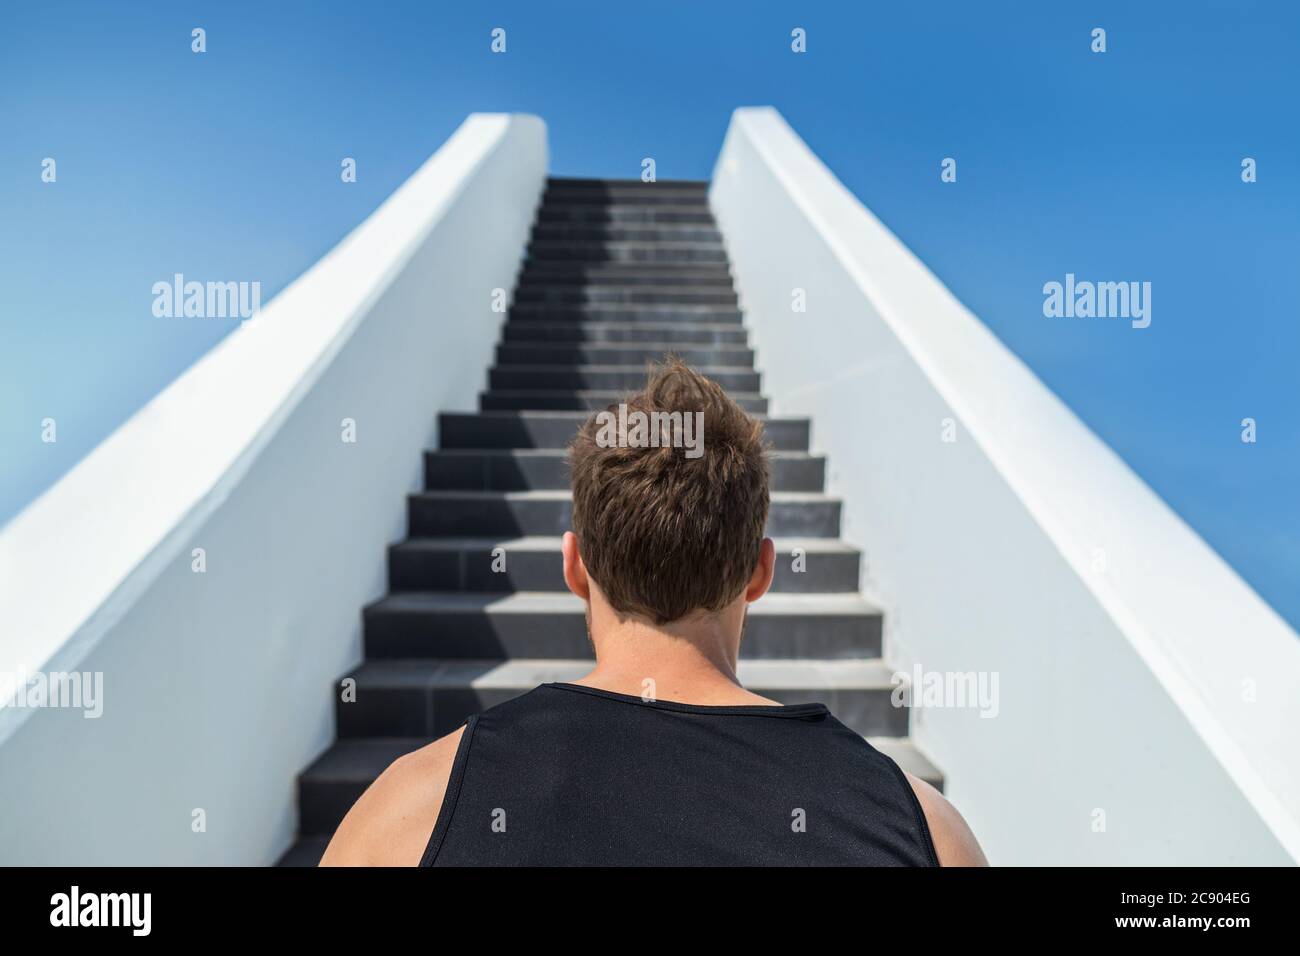 Fitness man looking ahead at stairs climbing challenge. Runner going up running staircase for cardio goal doing weight loss choice in healthy Stock Photo